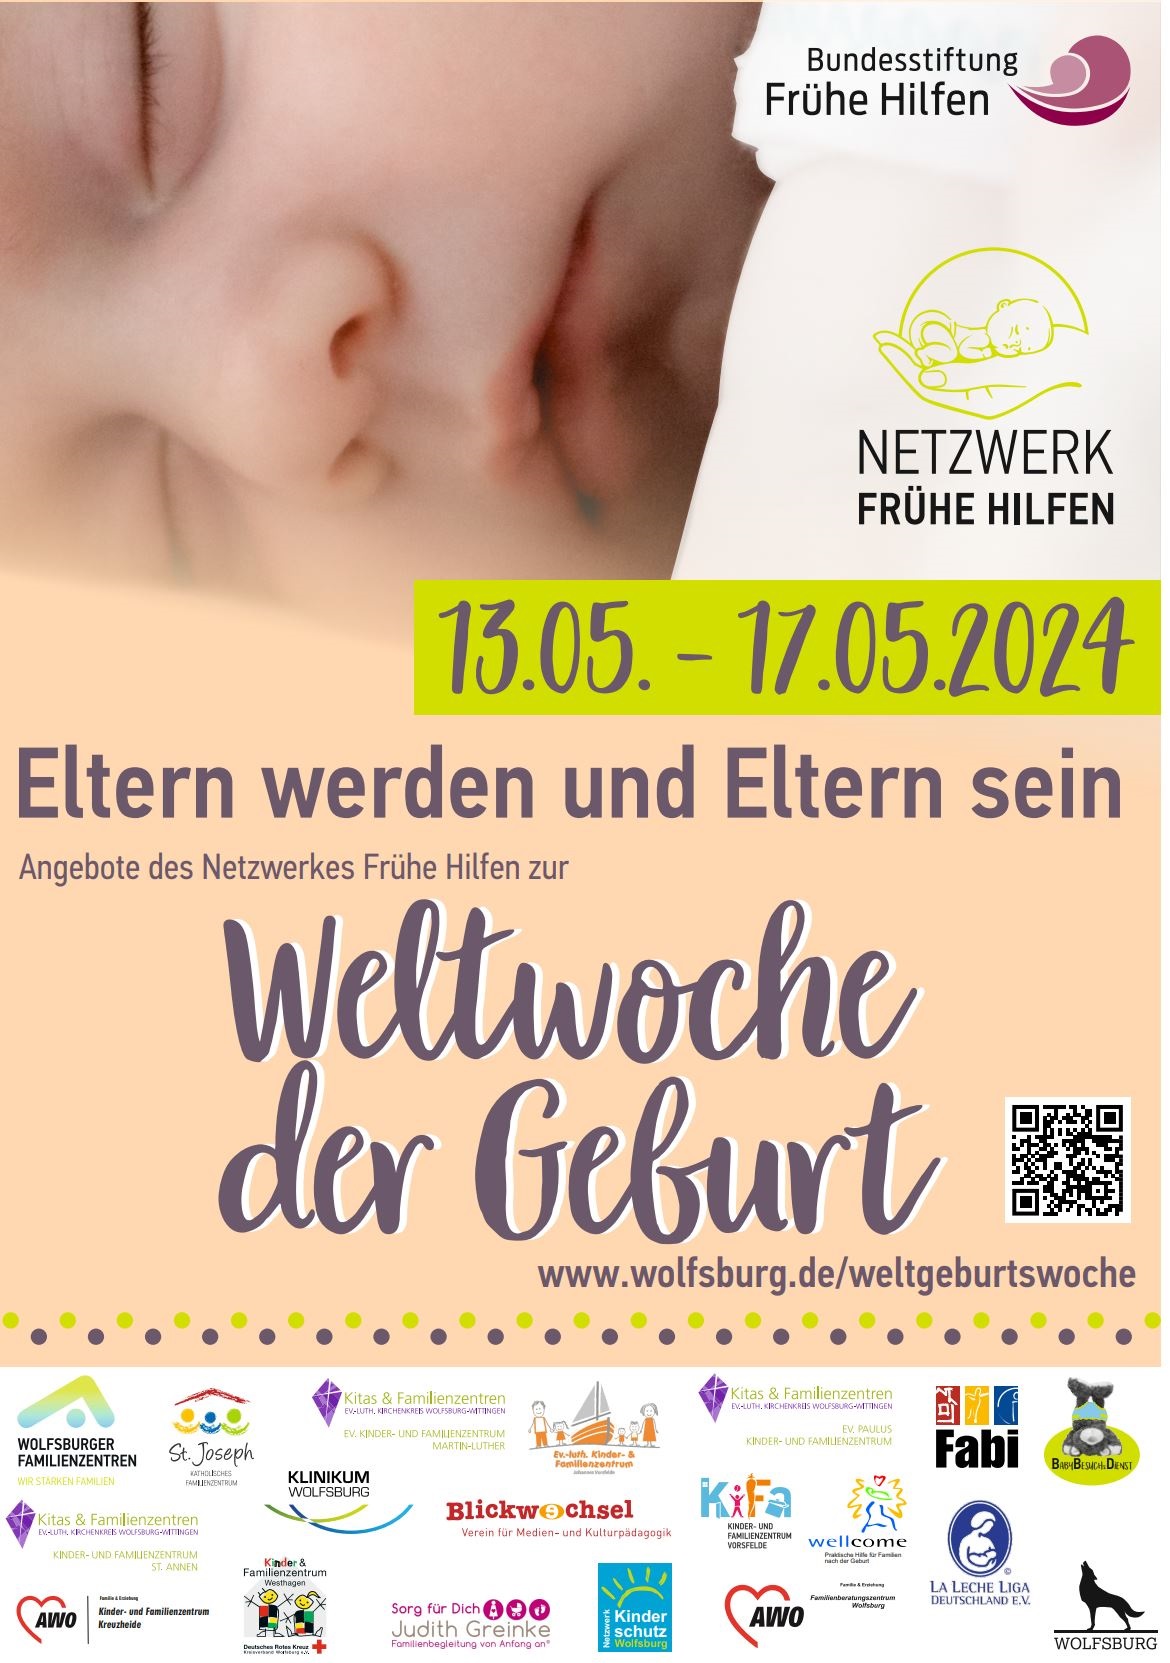 Poster for the World Birth Week